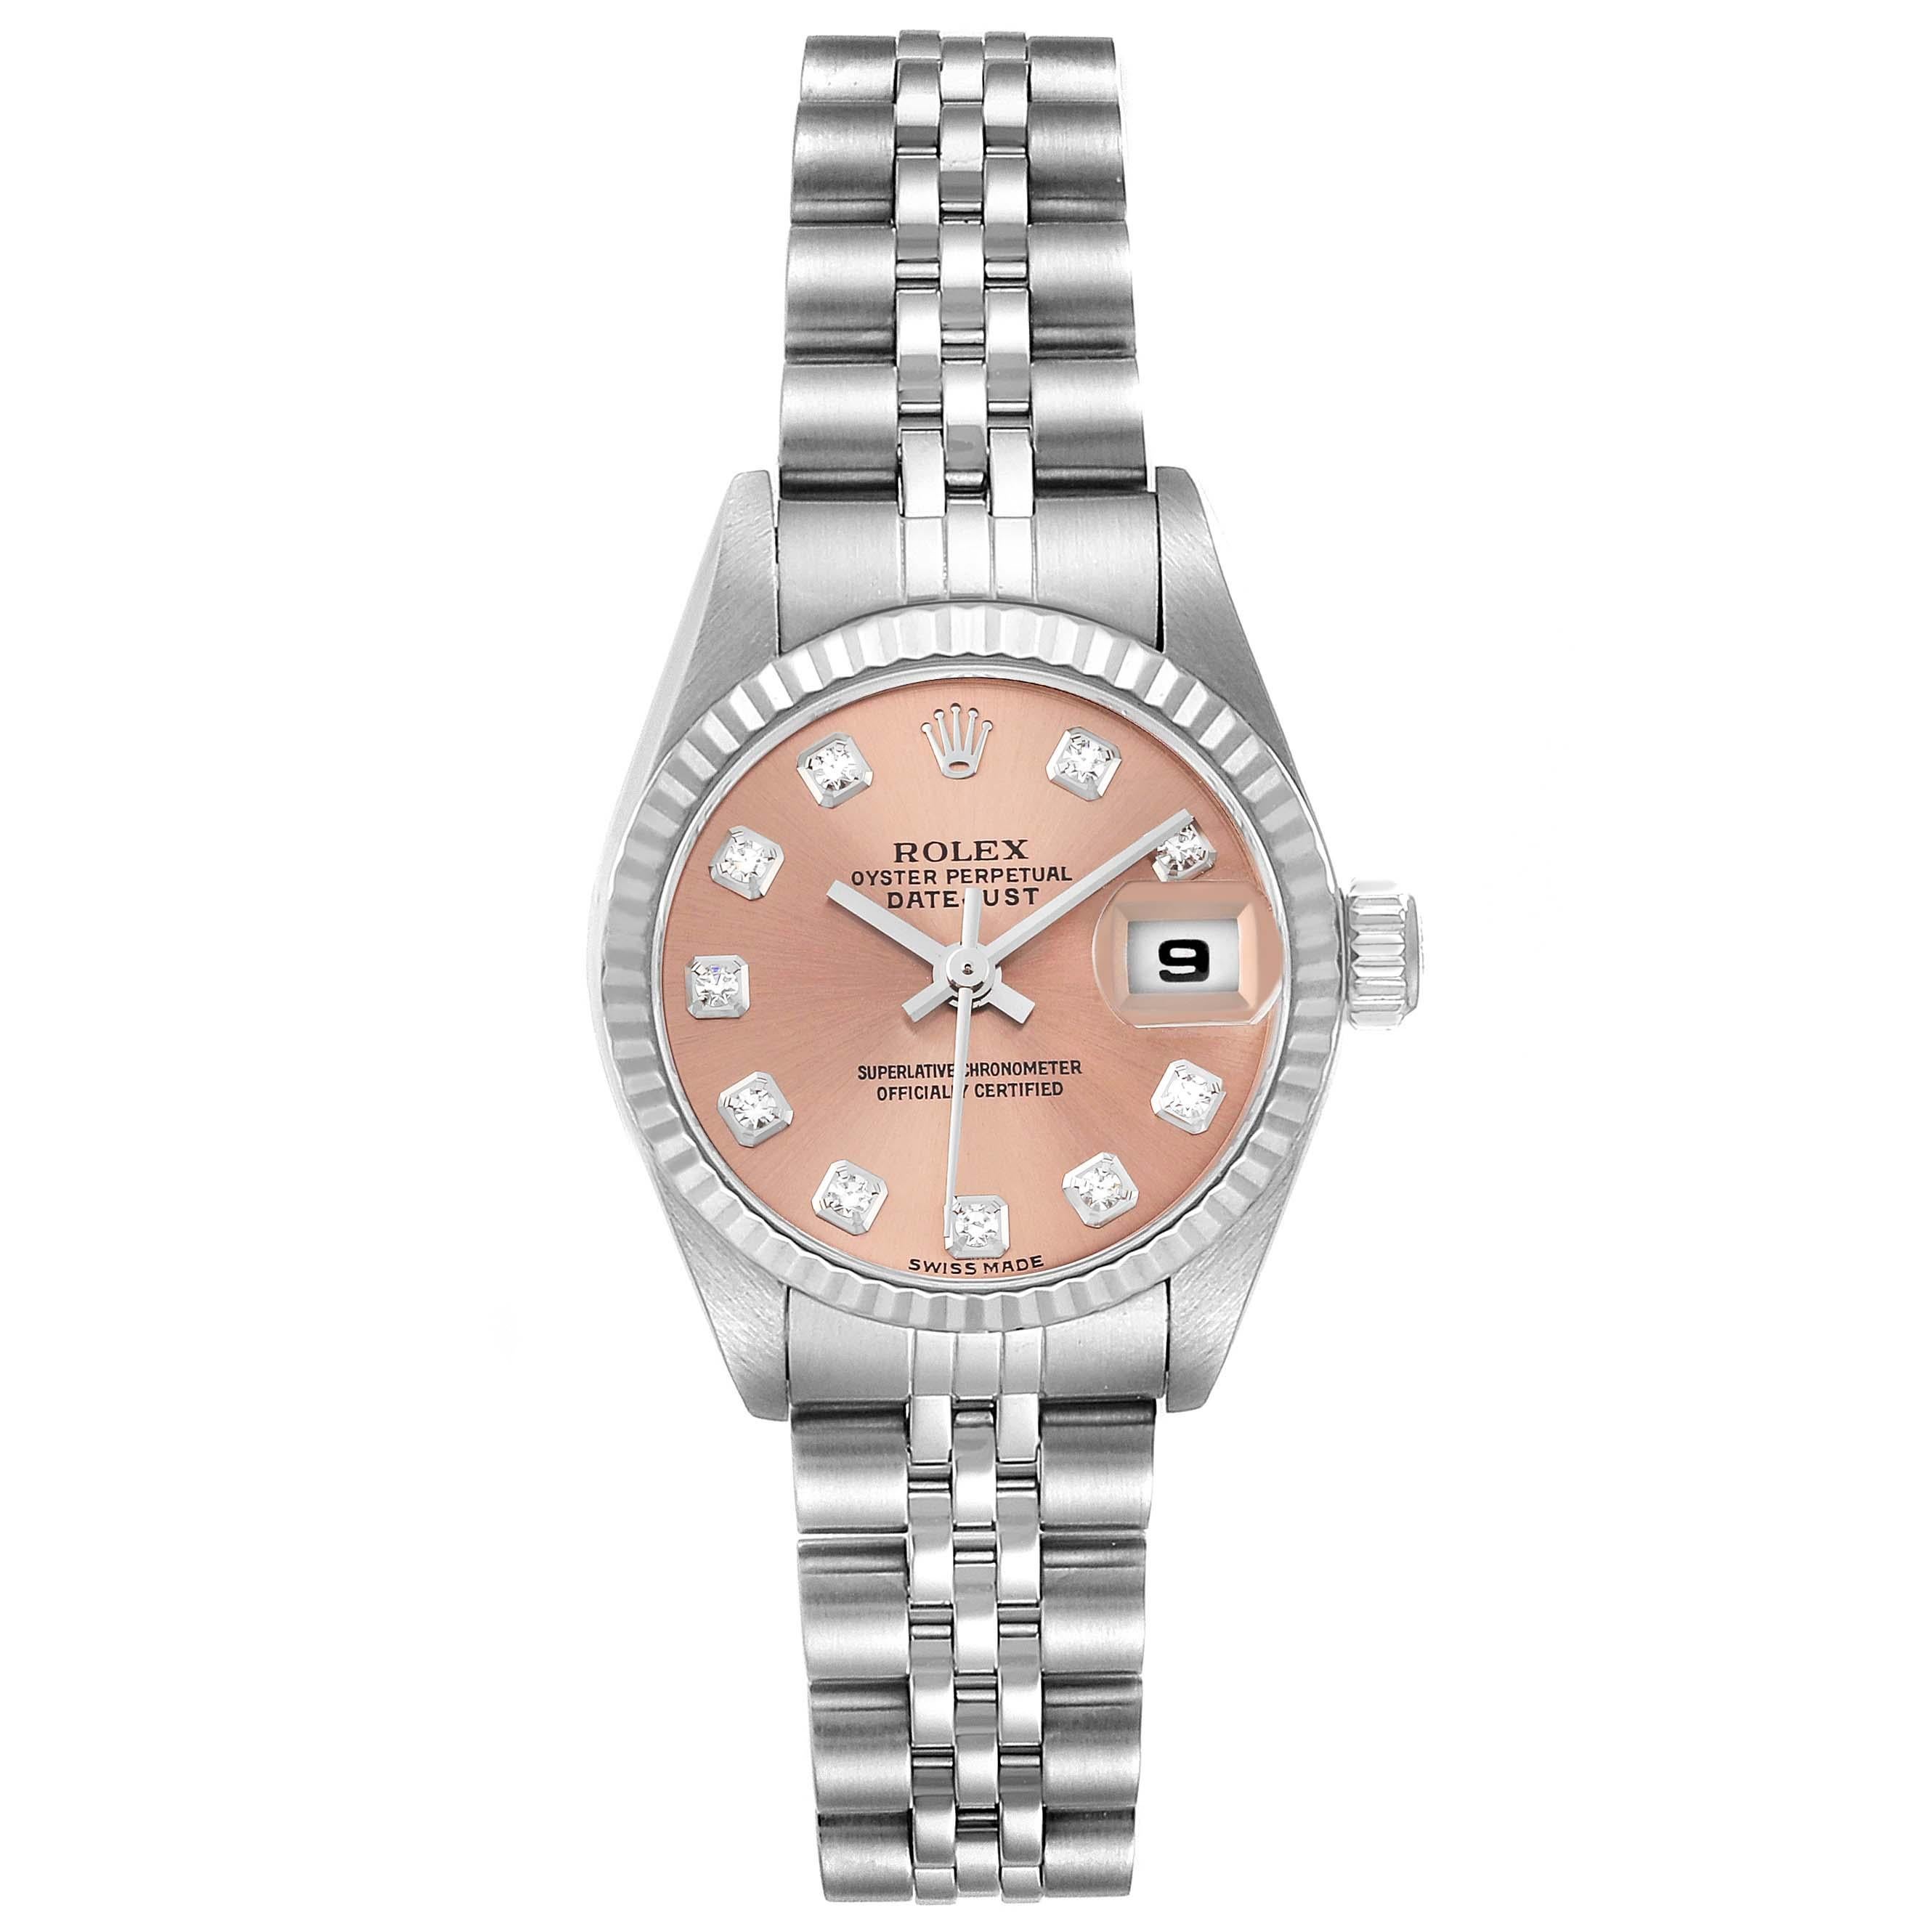 Rolex Datejust Salmon Diamond Dial White Gold Steel Ladies Watch 69174 In Excellent Condition For Sale In Atlanta, GA